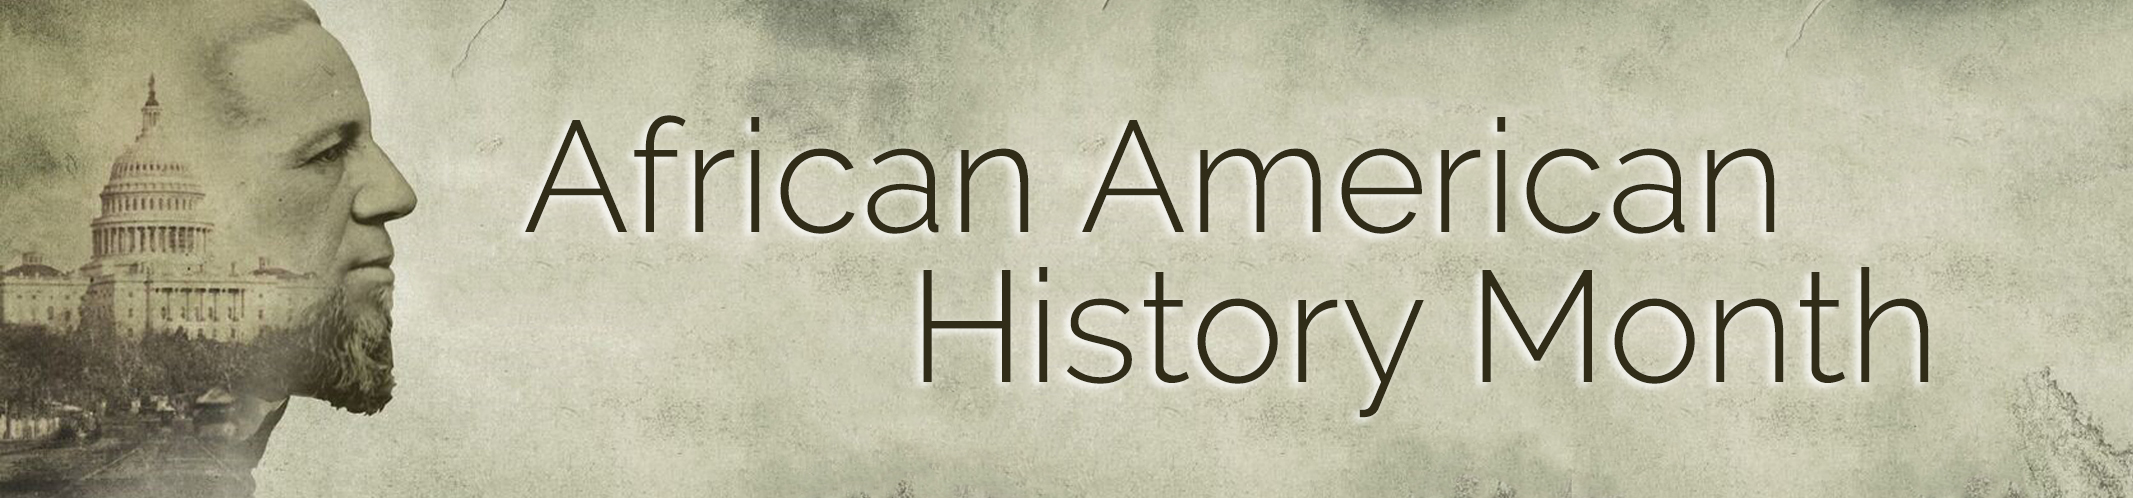 2019 African American History Month Header image